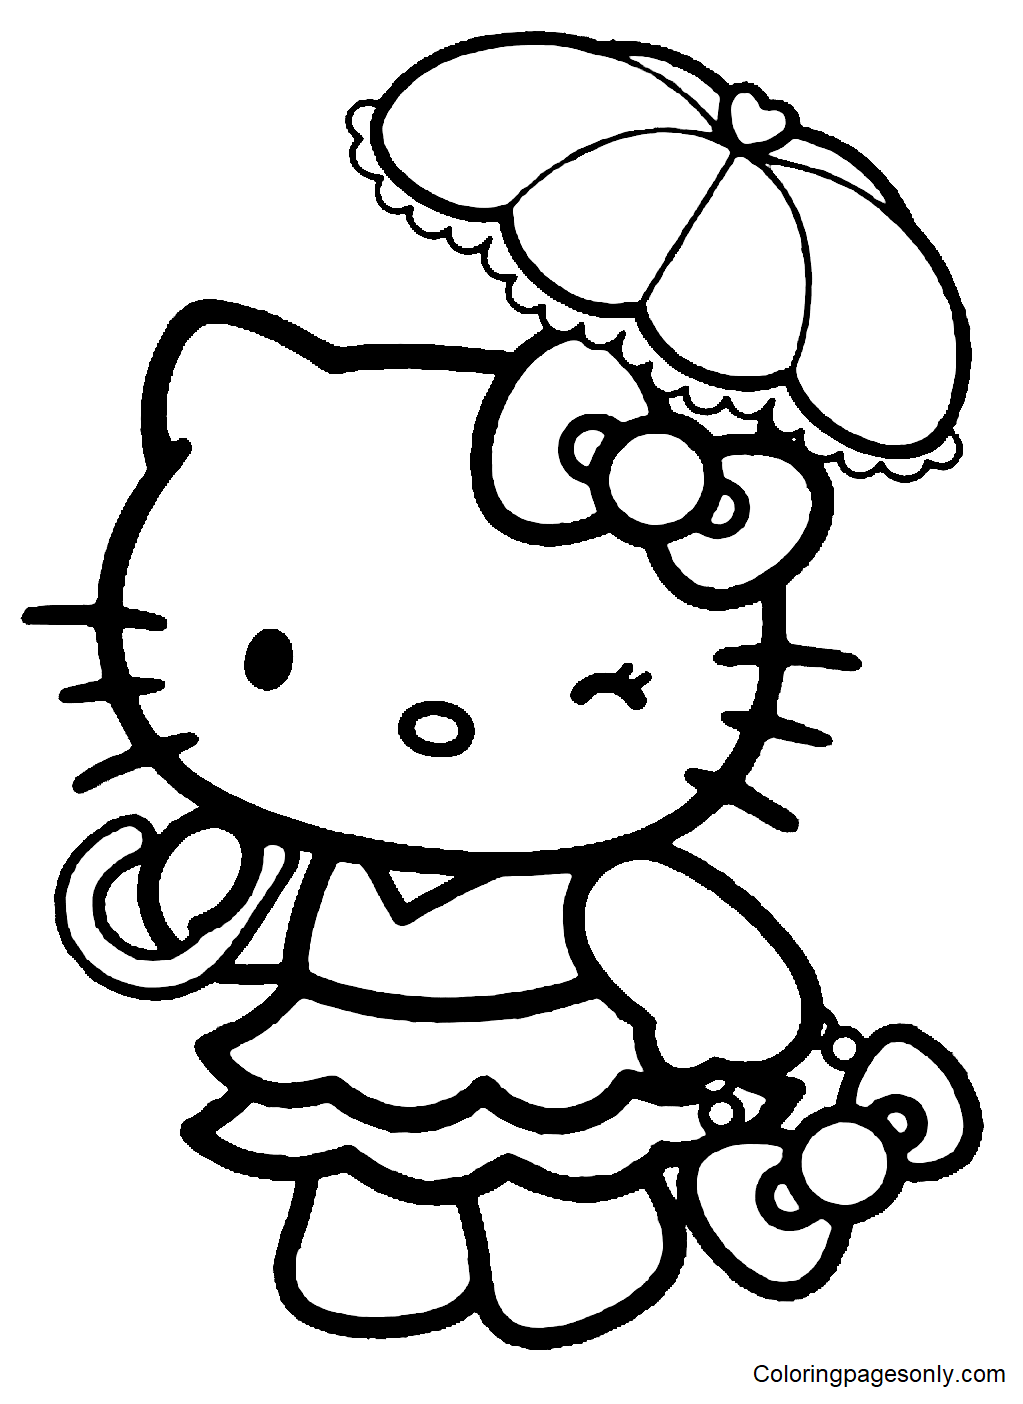 hello-kitty-coloring-sheet-coloring-page-free-printable-coloring-pages